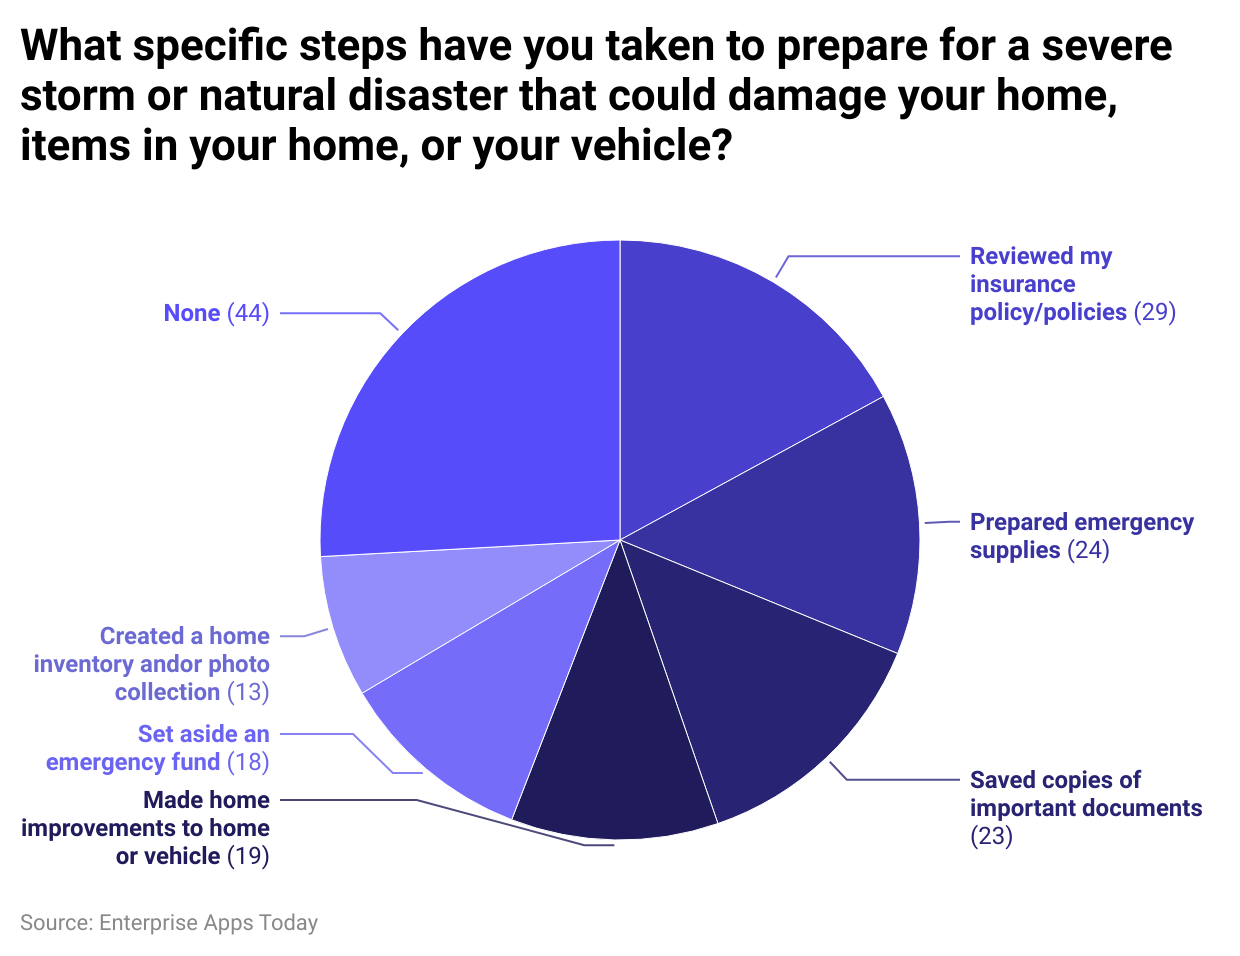 what-specific-steps-have-you-taken-to-prepare-for-a-severe-storm-or-natural-disaster-that-could-damage-your-home-items-in-your-home-or-your-vehicle